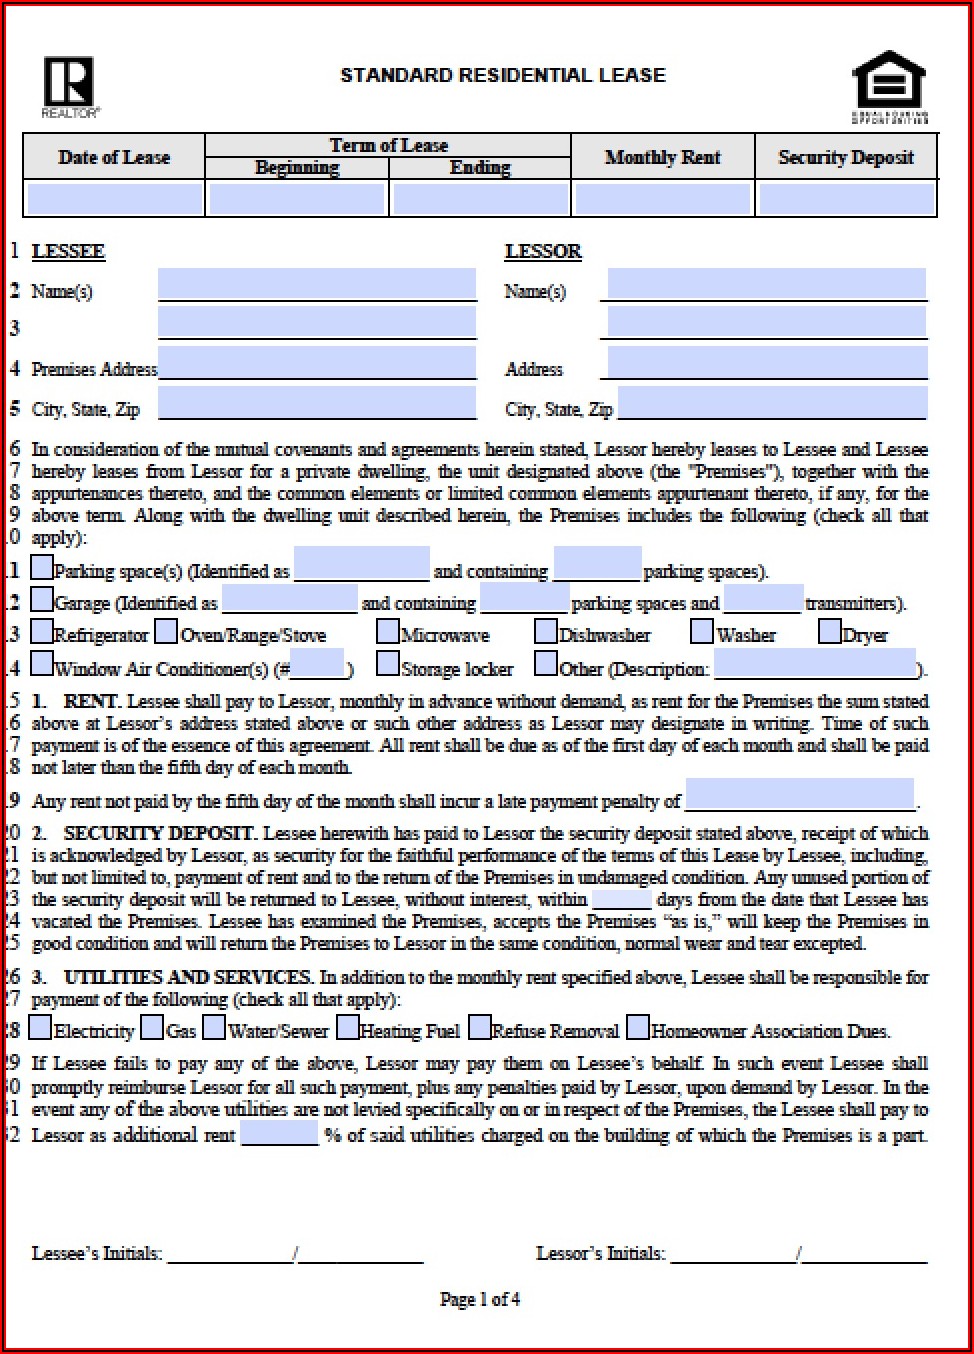 Illinois Residential Lease Agreement Template